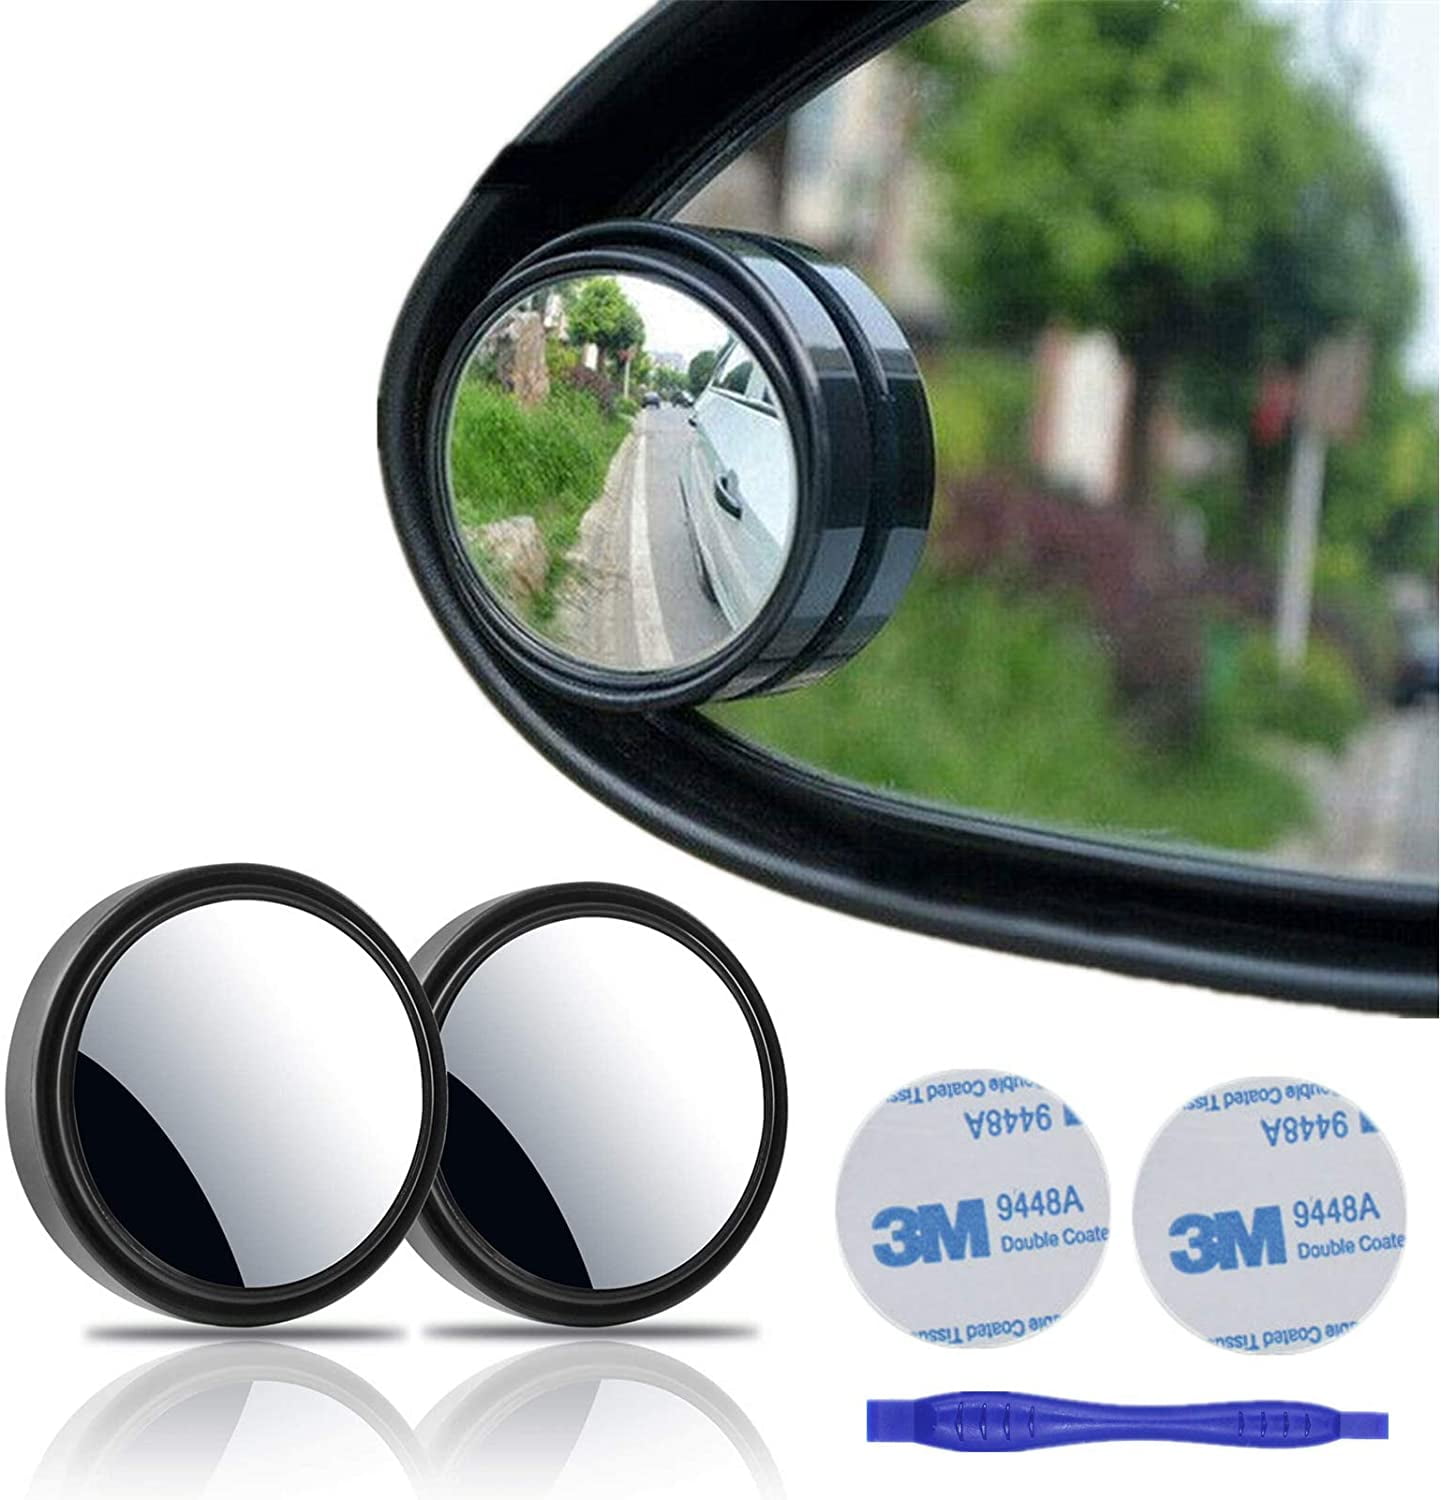 Black 1 Pair Small Round Convex Adjustable 360°Rotate Wide Angle Car Rear View Nirror for All Universal Vehicles Car Fit Stick-on Design KEWAYO 2 Pack Automotive Blind Spot Mirrors 